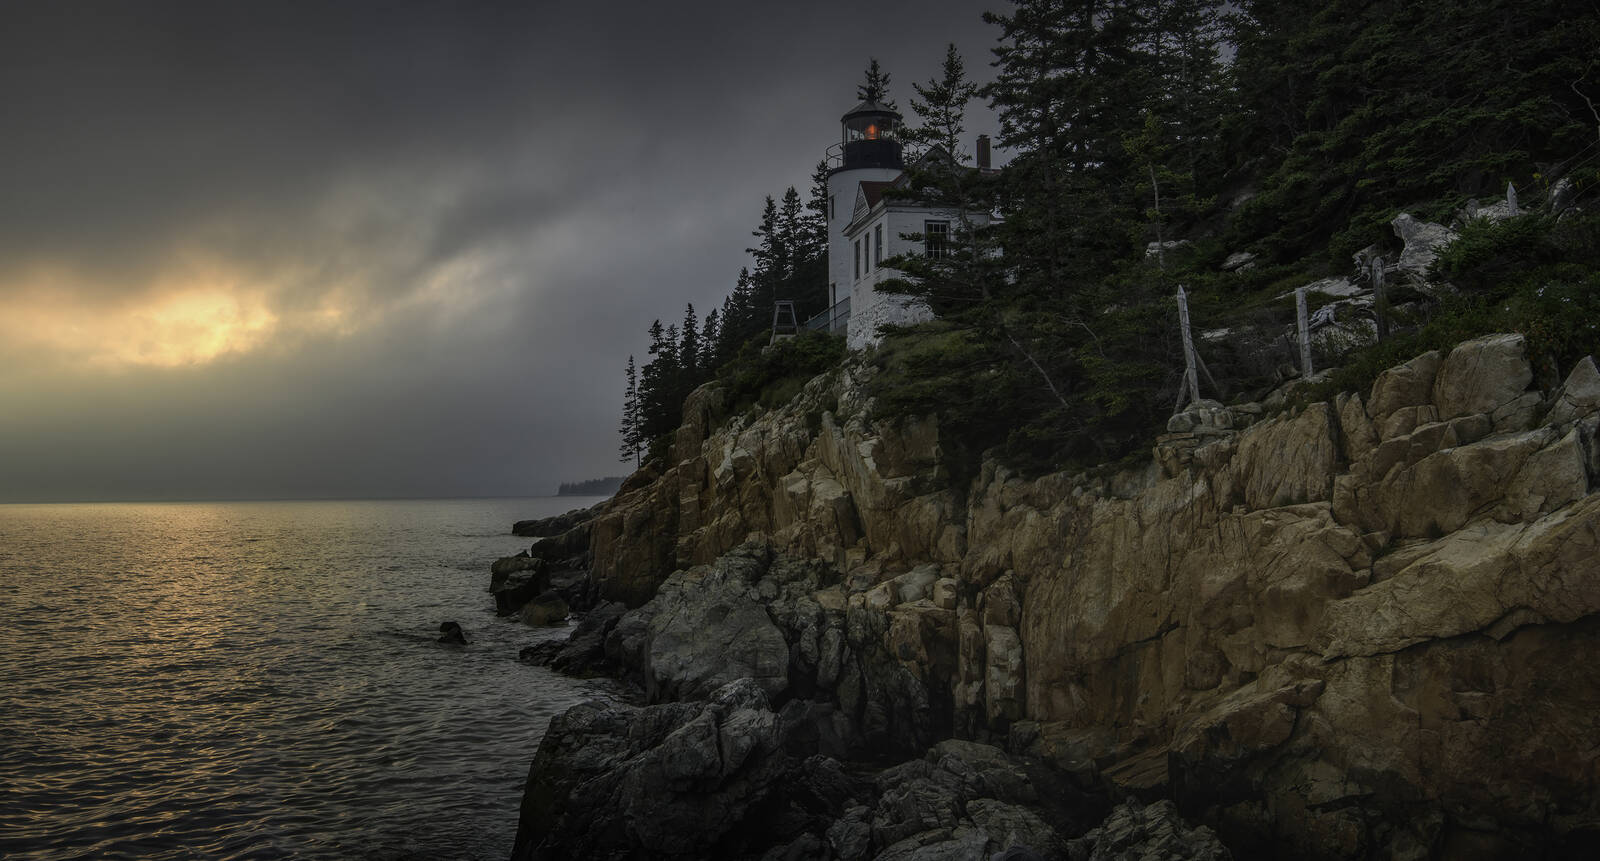 Image of Bass Harbor Lighthouse by Flemming Nielsen